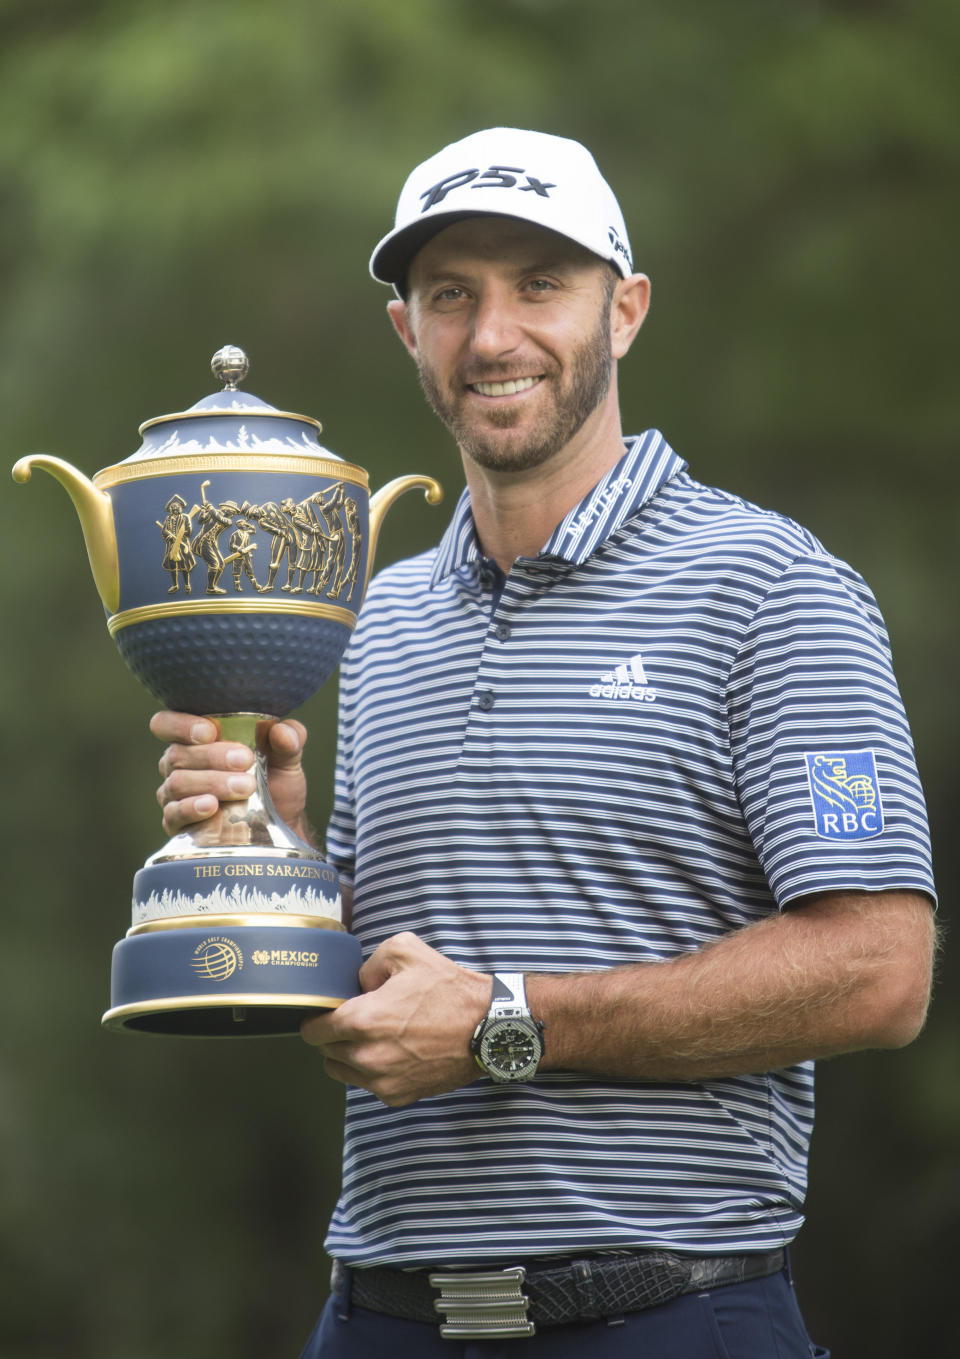 U.S. golfer Dustin Johnson poses with his Mexico Championship trophy at the Chapultepec Golf Club in Mexico City, Sunday, Feb. 24, 2019. (AP Photo/Christian Palma)